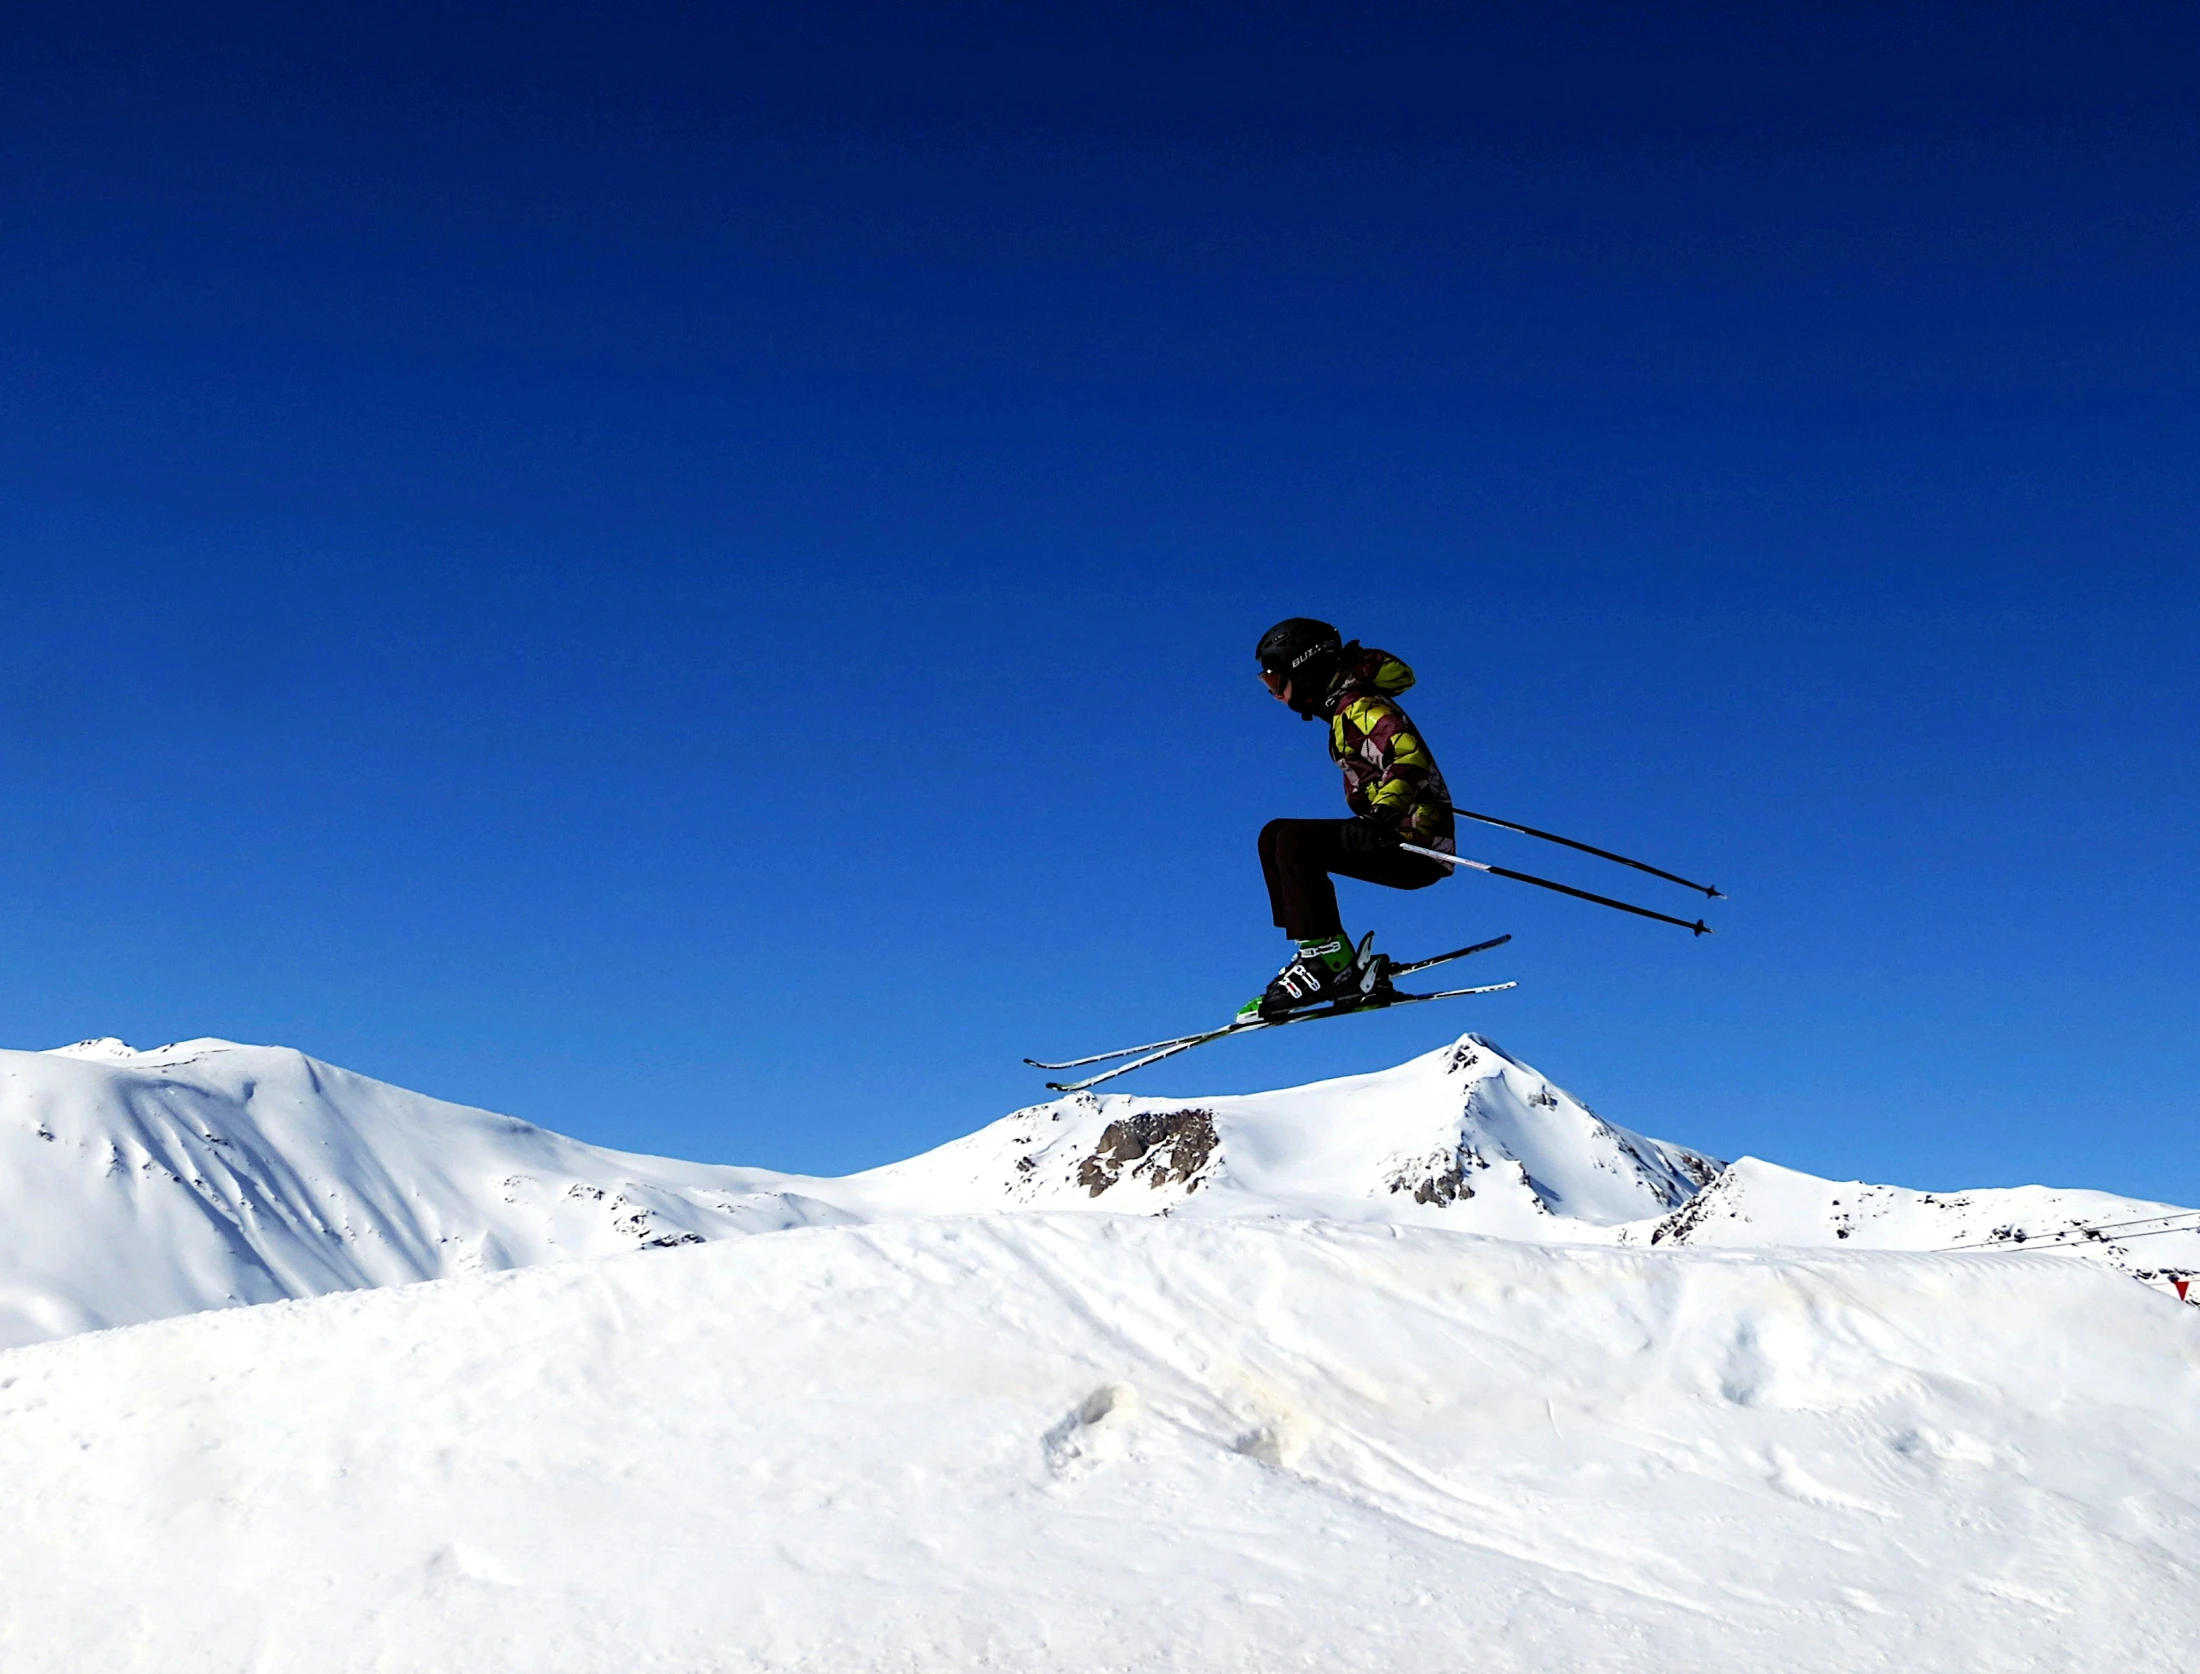 the skier is headed into the air on his skis